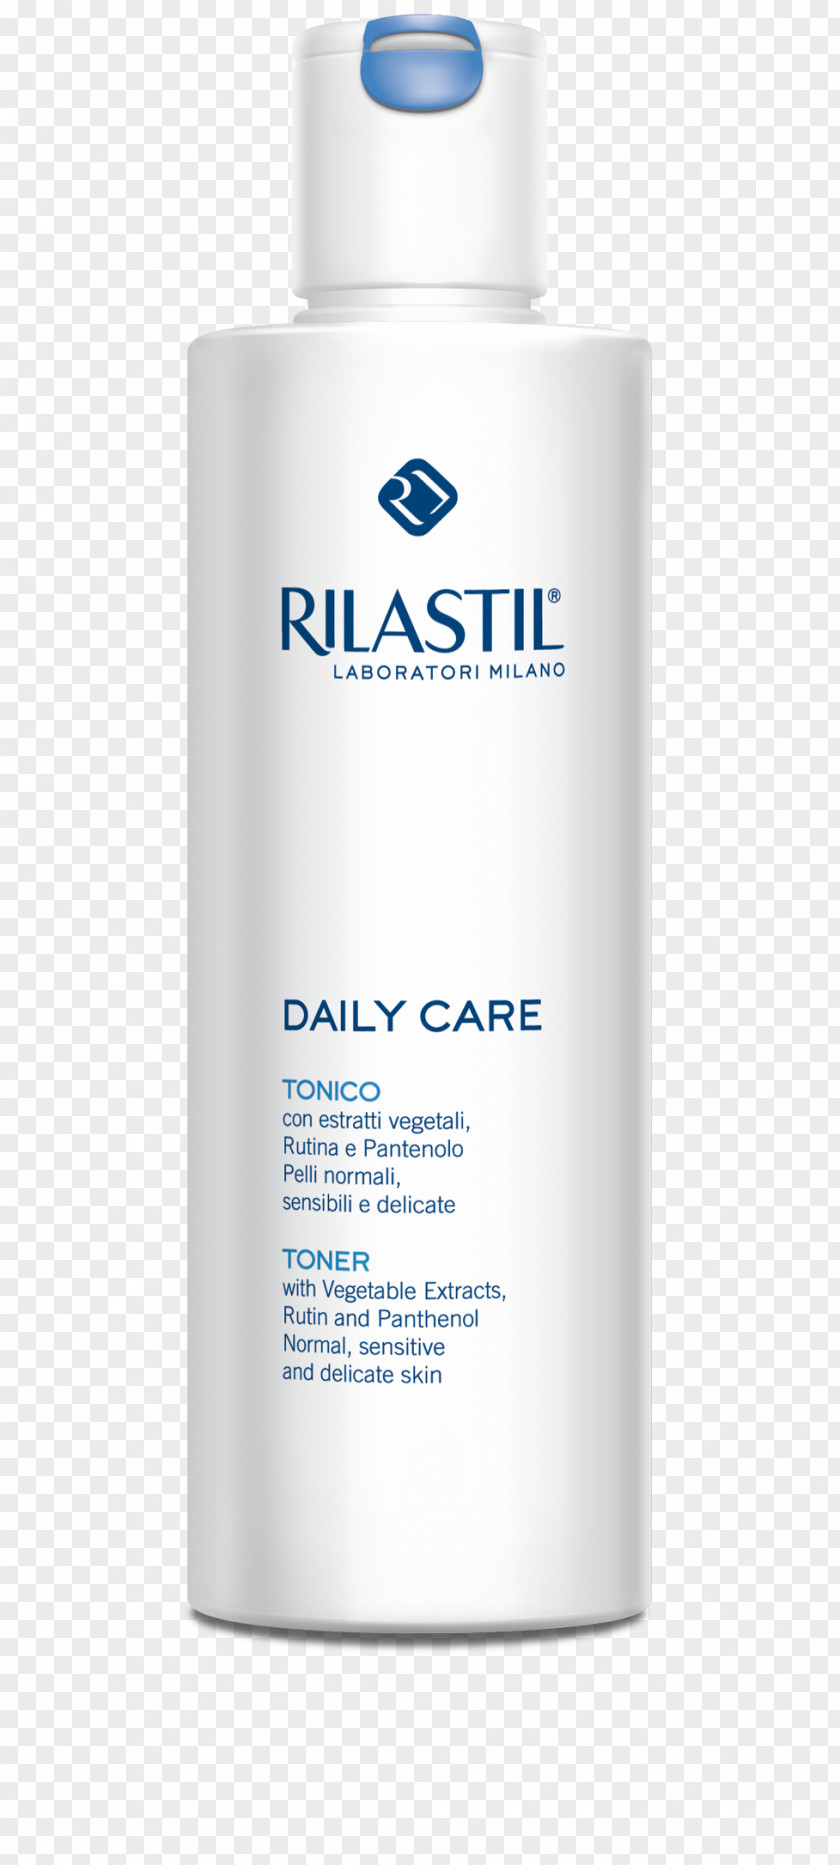 Horsetail Herb Powder Lotion Rilastil Daily Care Facial Toner (with Vegetable Extracts Rutin And Panthenol) 250 Ml Reinigungswasser Milliliter PNG